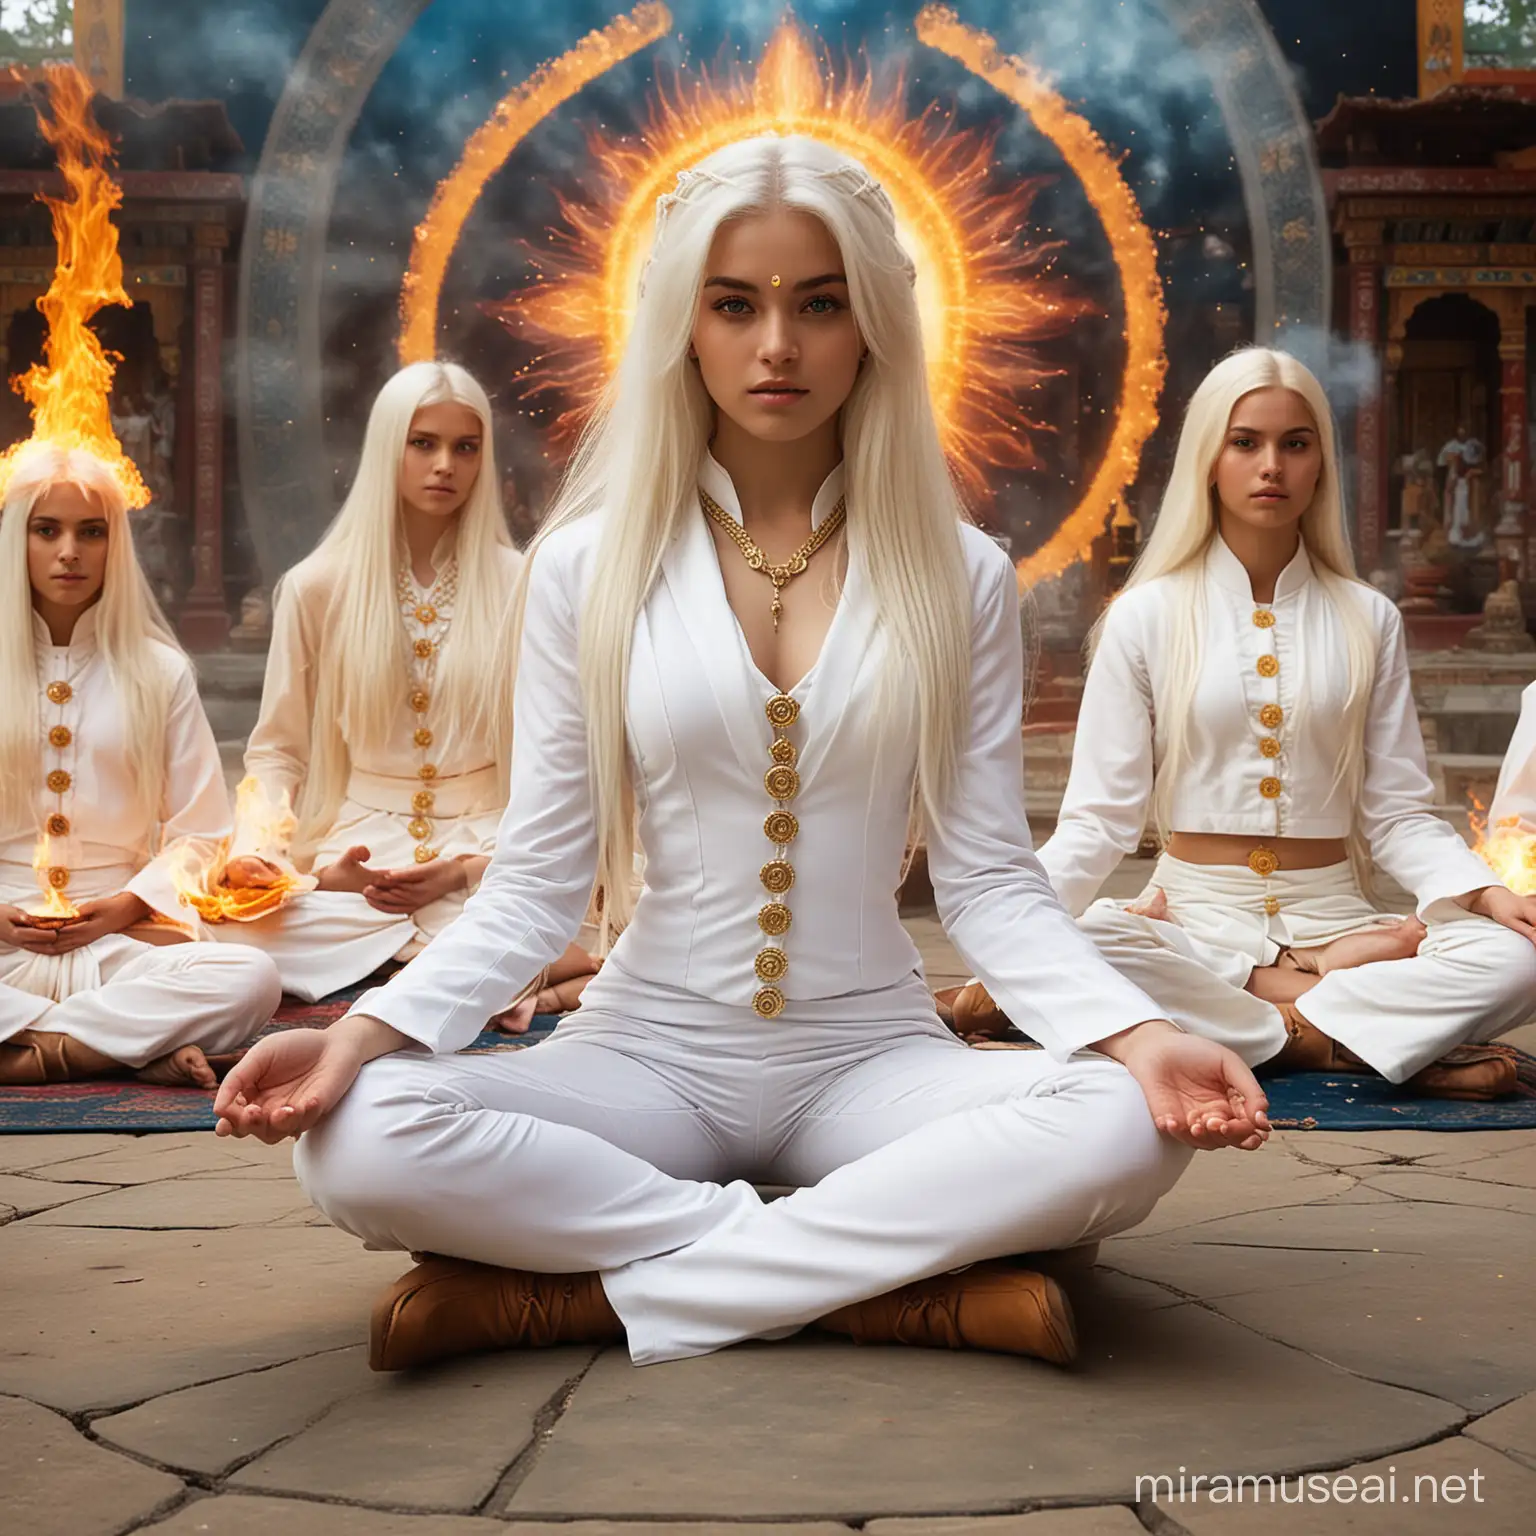 Teenage Goddess in White Suit Amid Cosmic Energy and Monastery